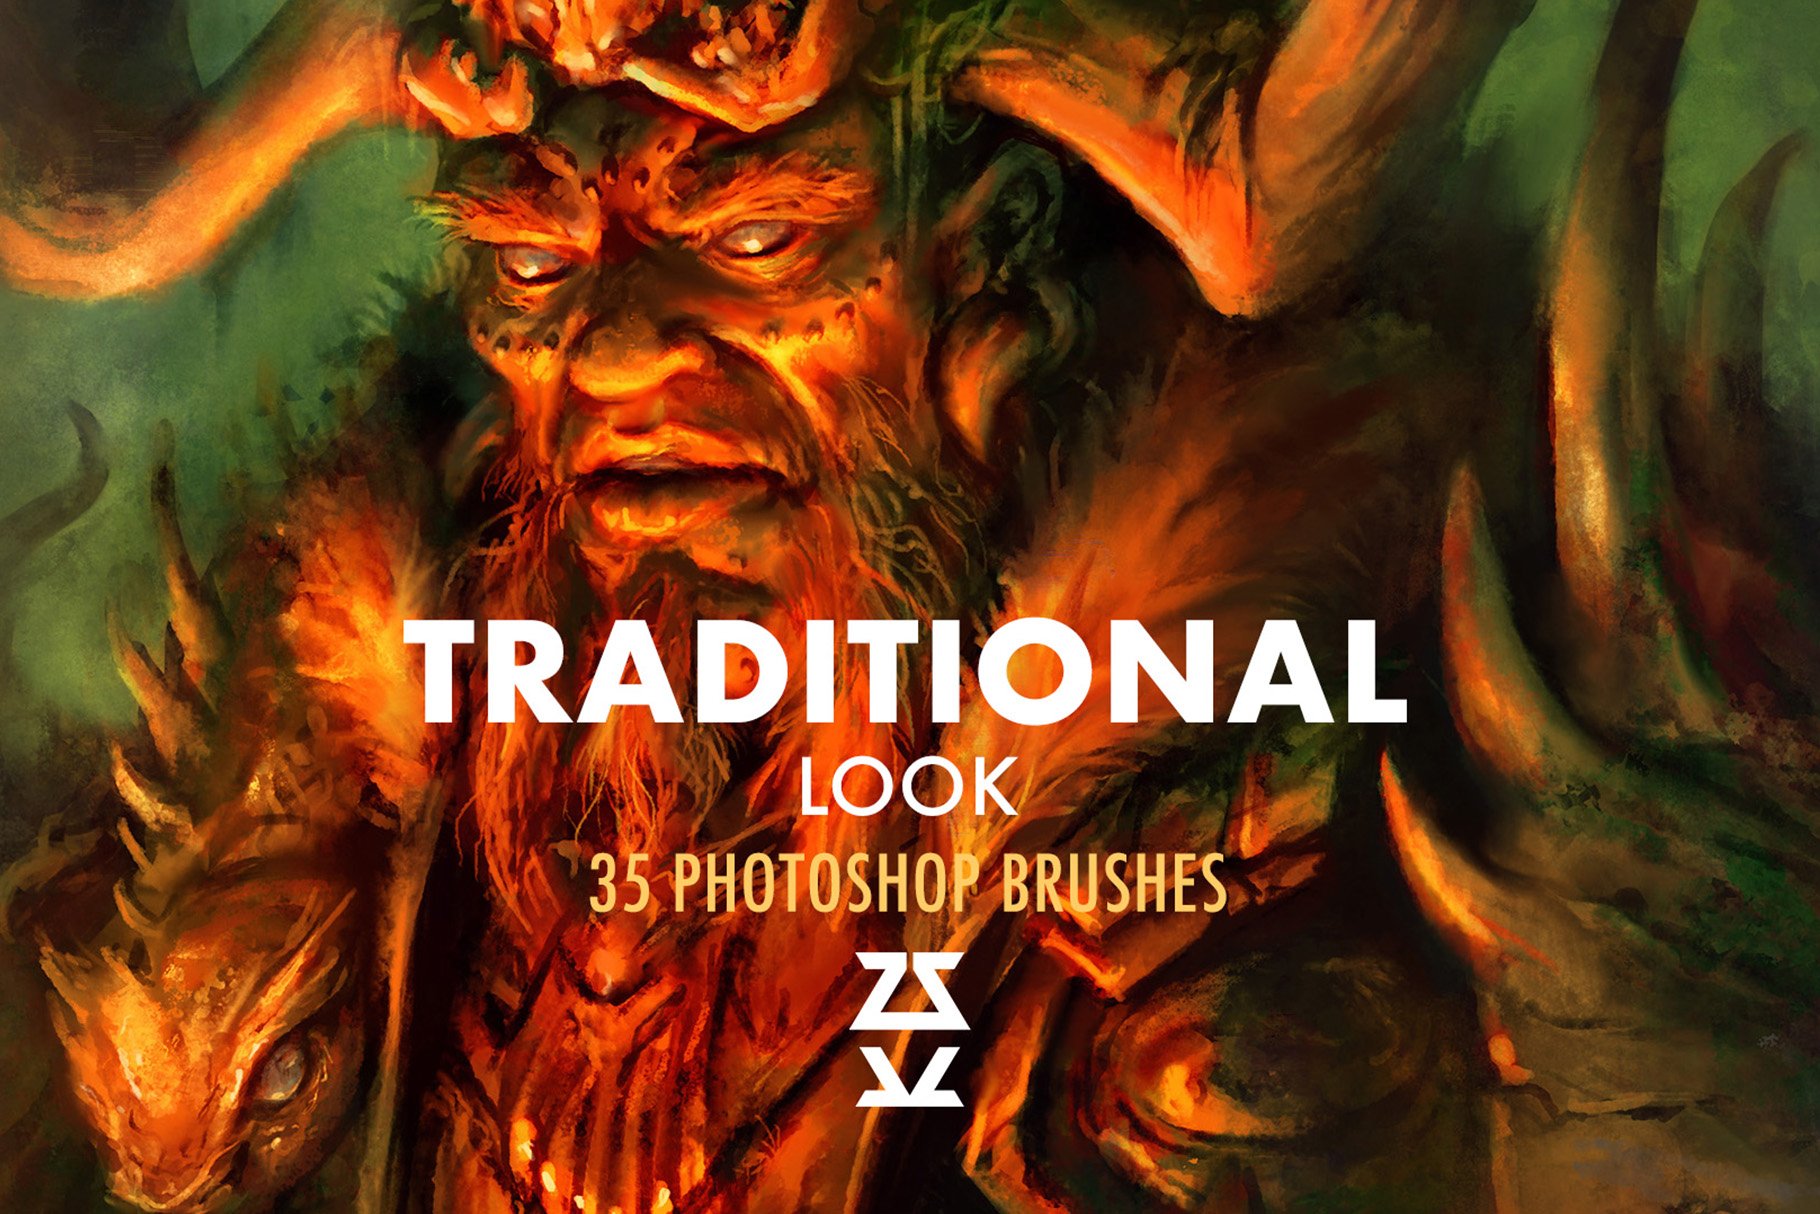 Traditional Look Brush Setcover image.